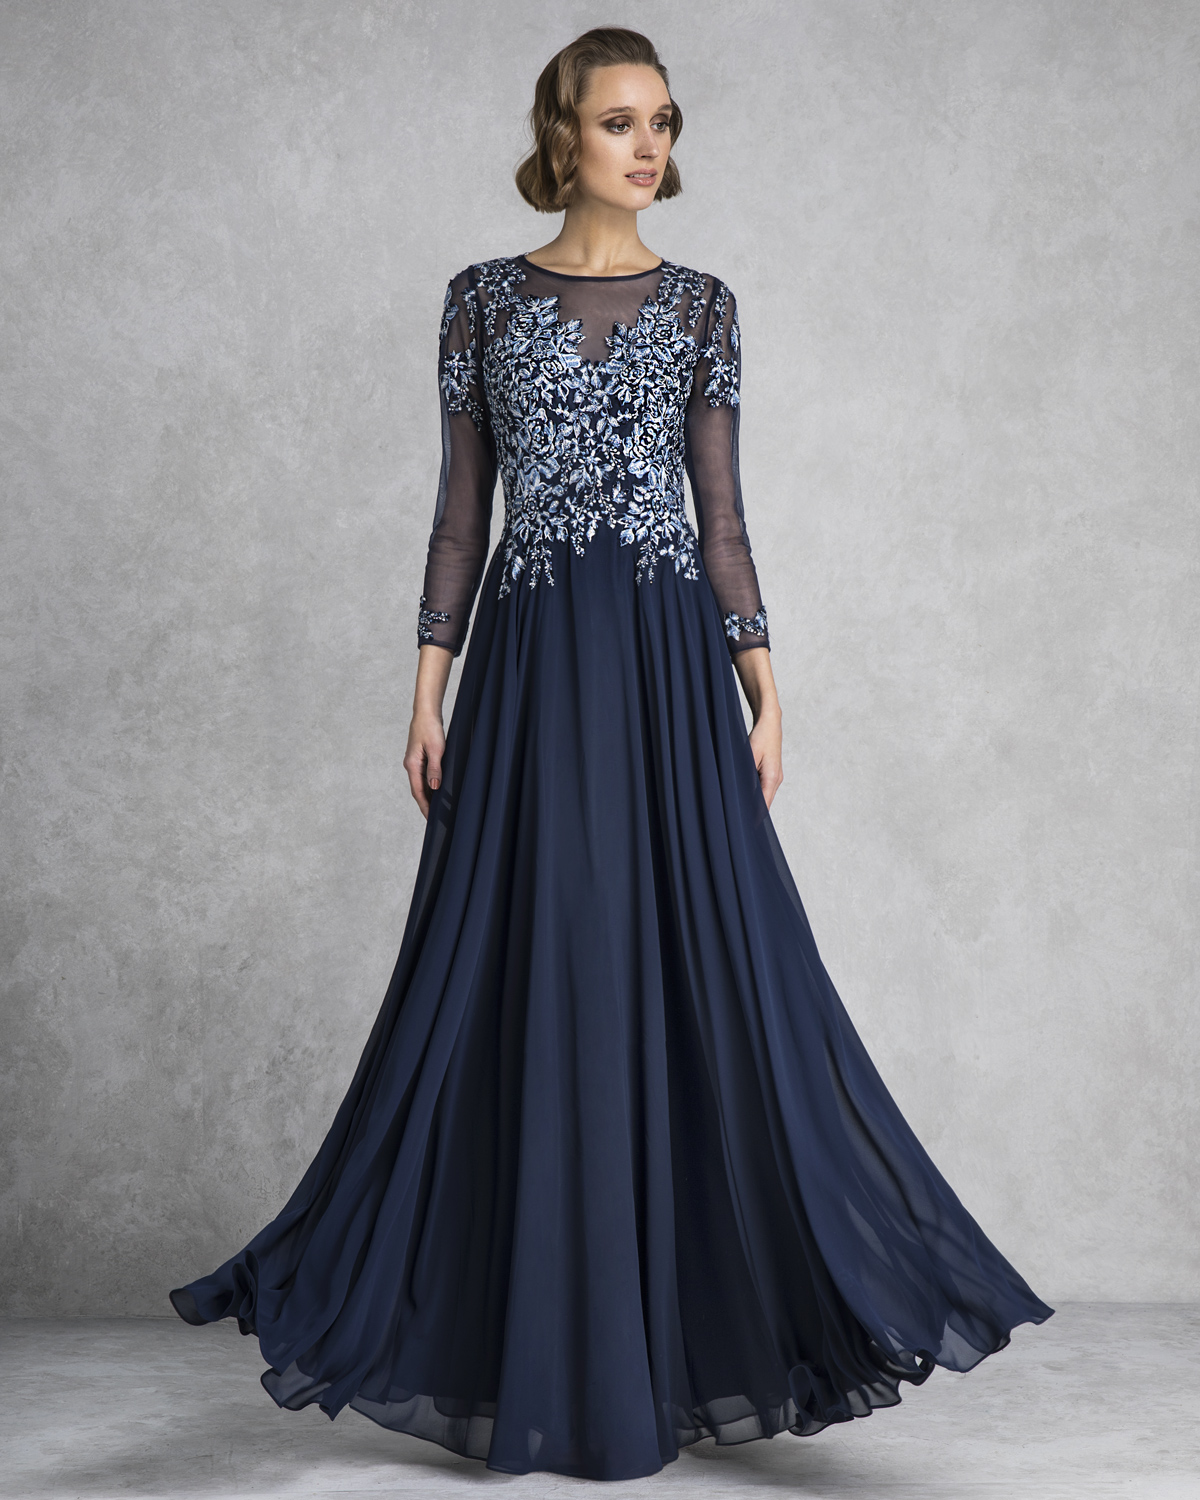 Classic Dresses / Long evening dress with long tulle sleeves and beading